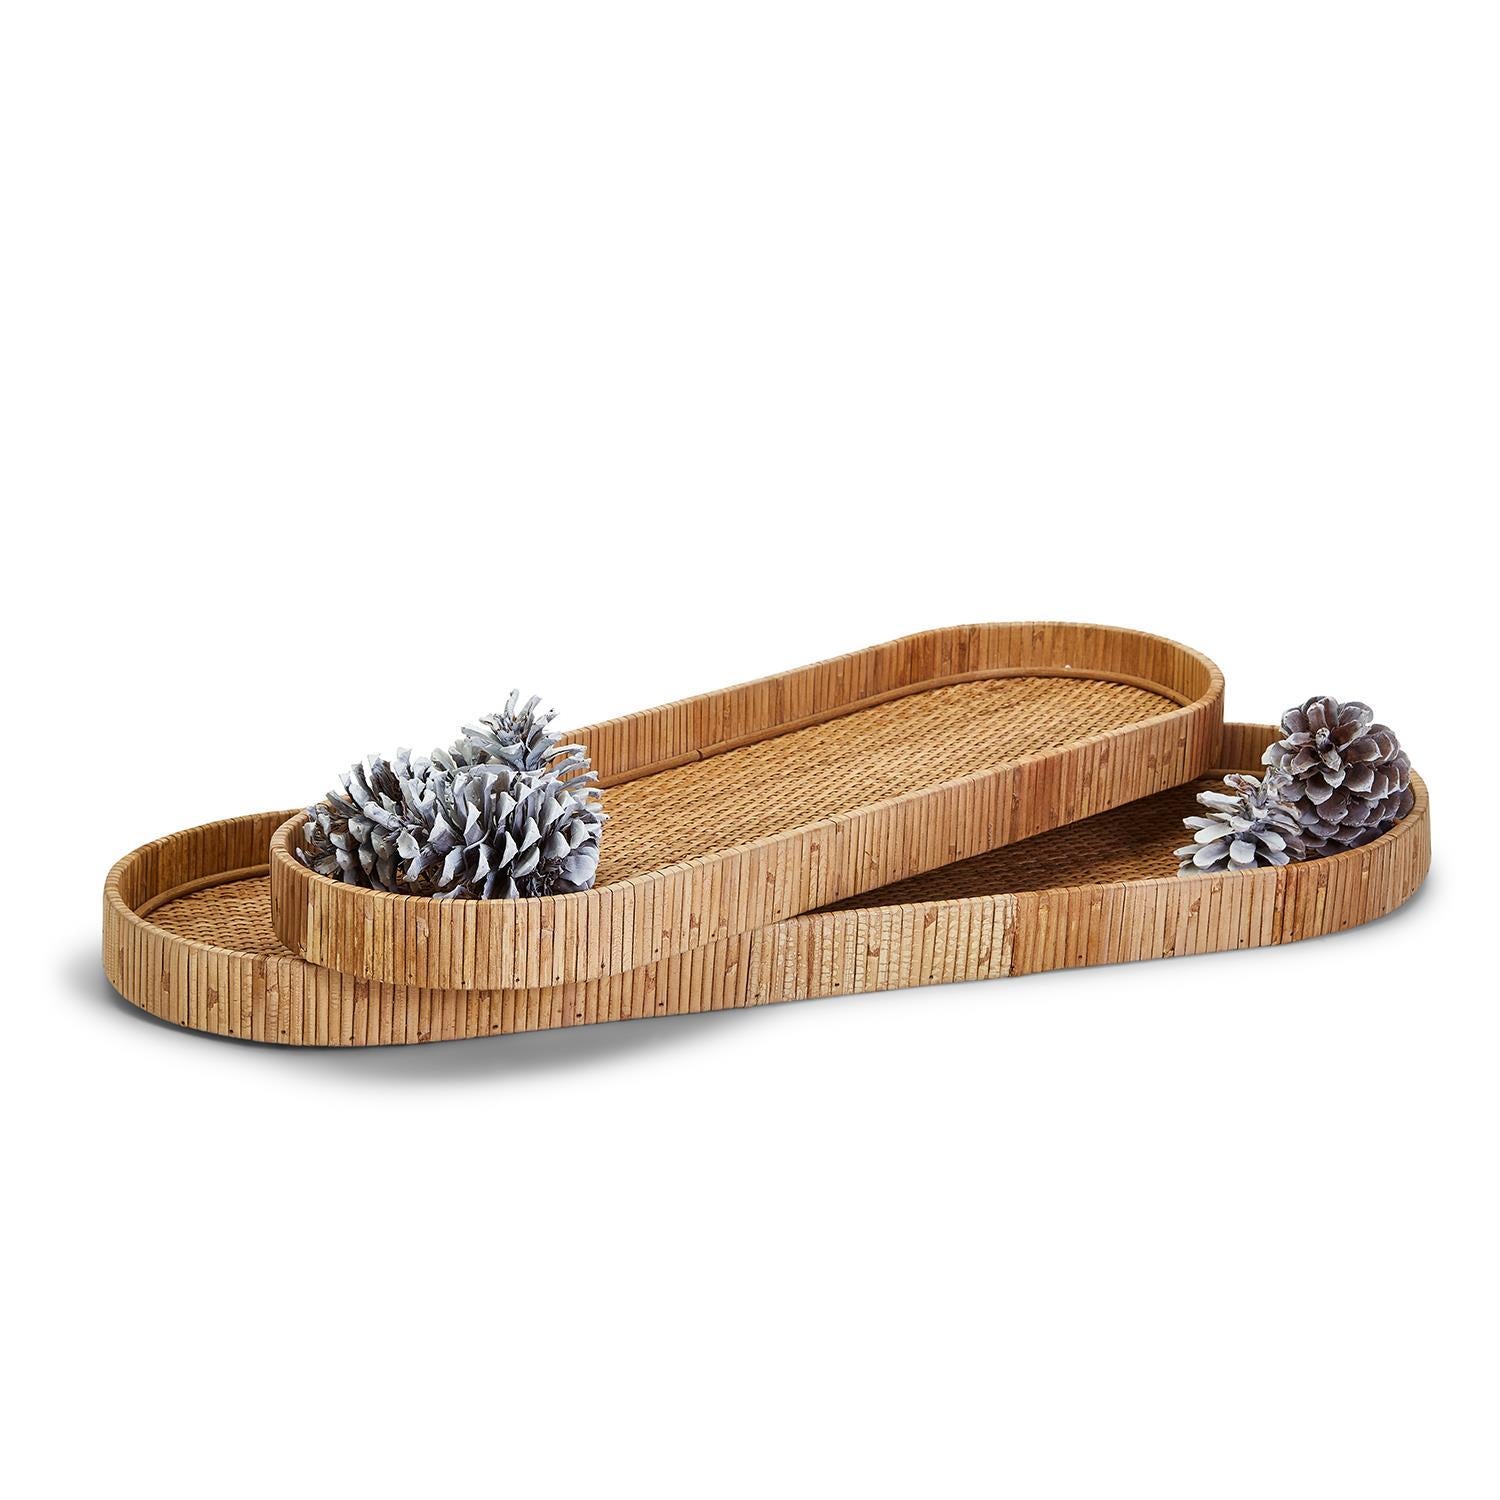 Two's Company S/2 Decorative Hand-Crafted Natural Rattan Trays